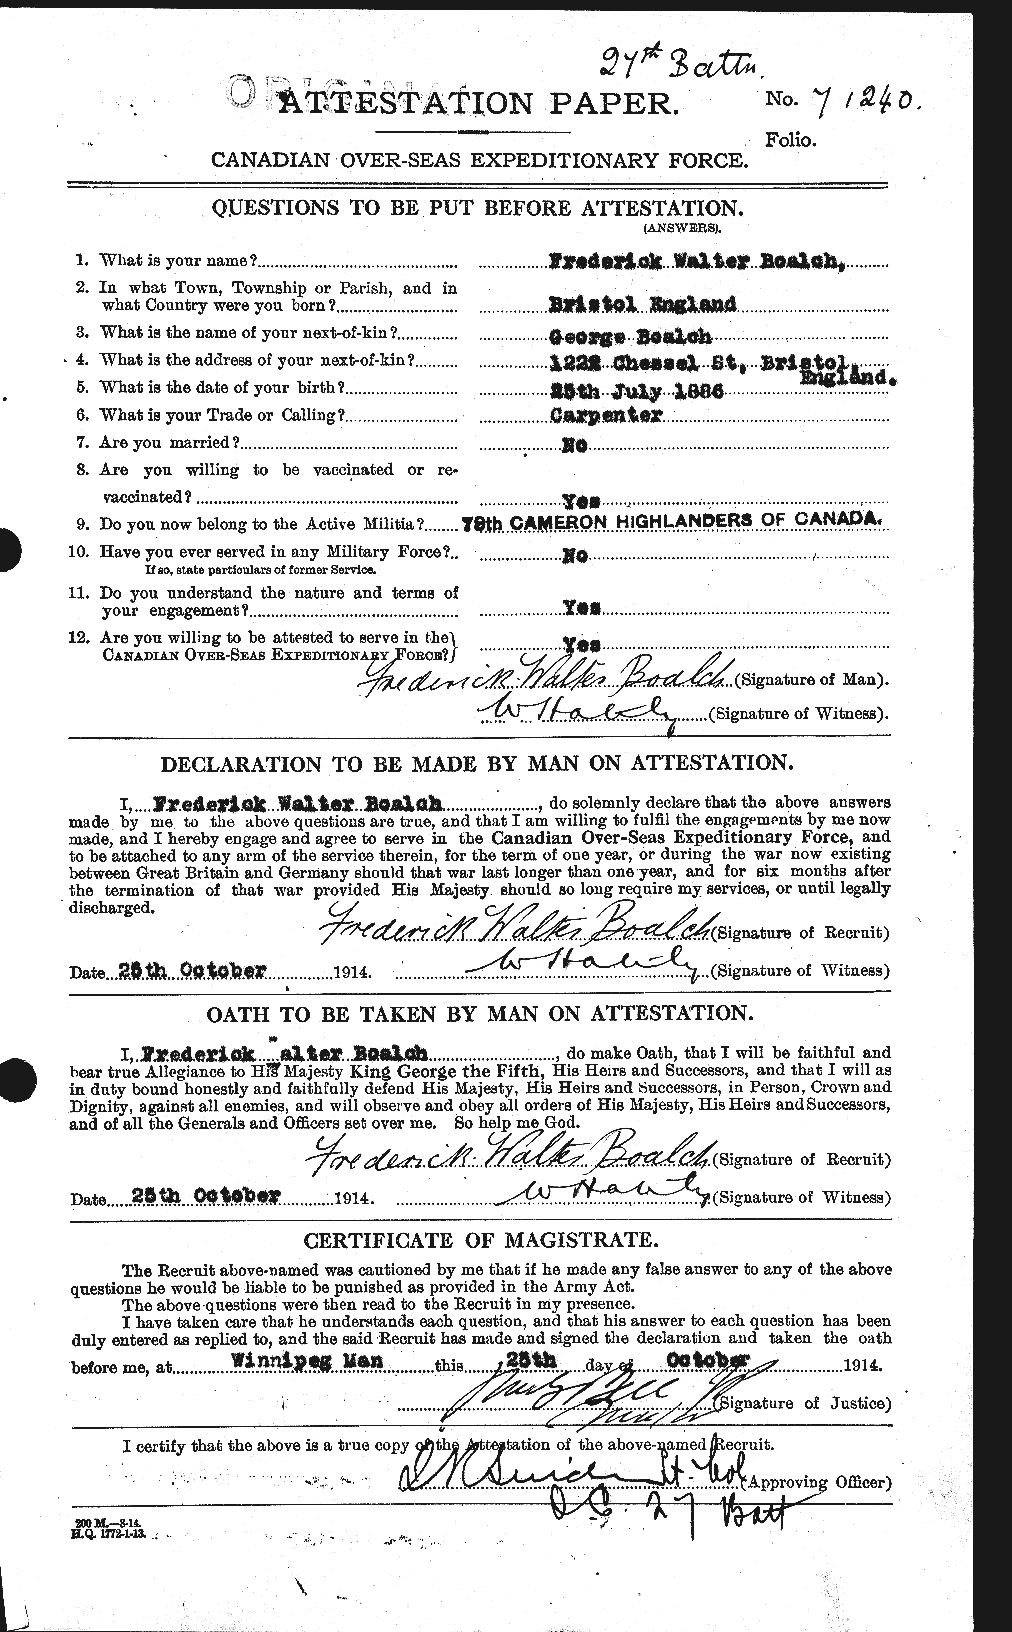 Personnel Records of the First World War - CEF 247293a